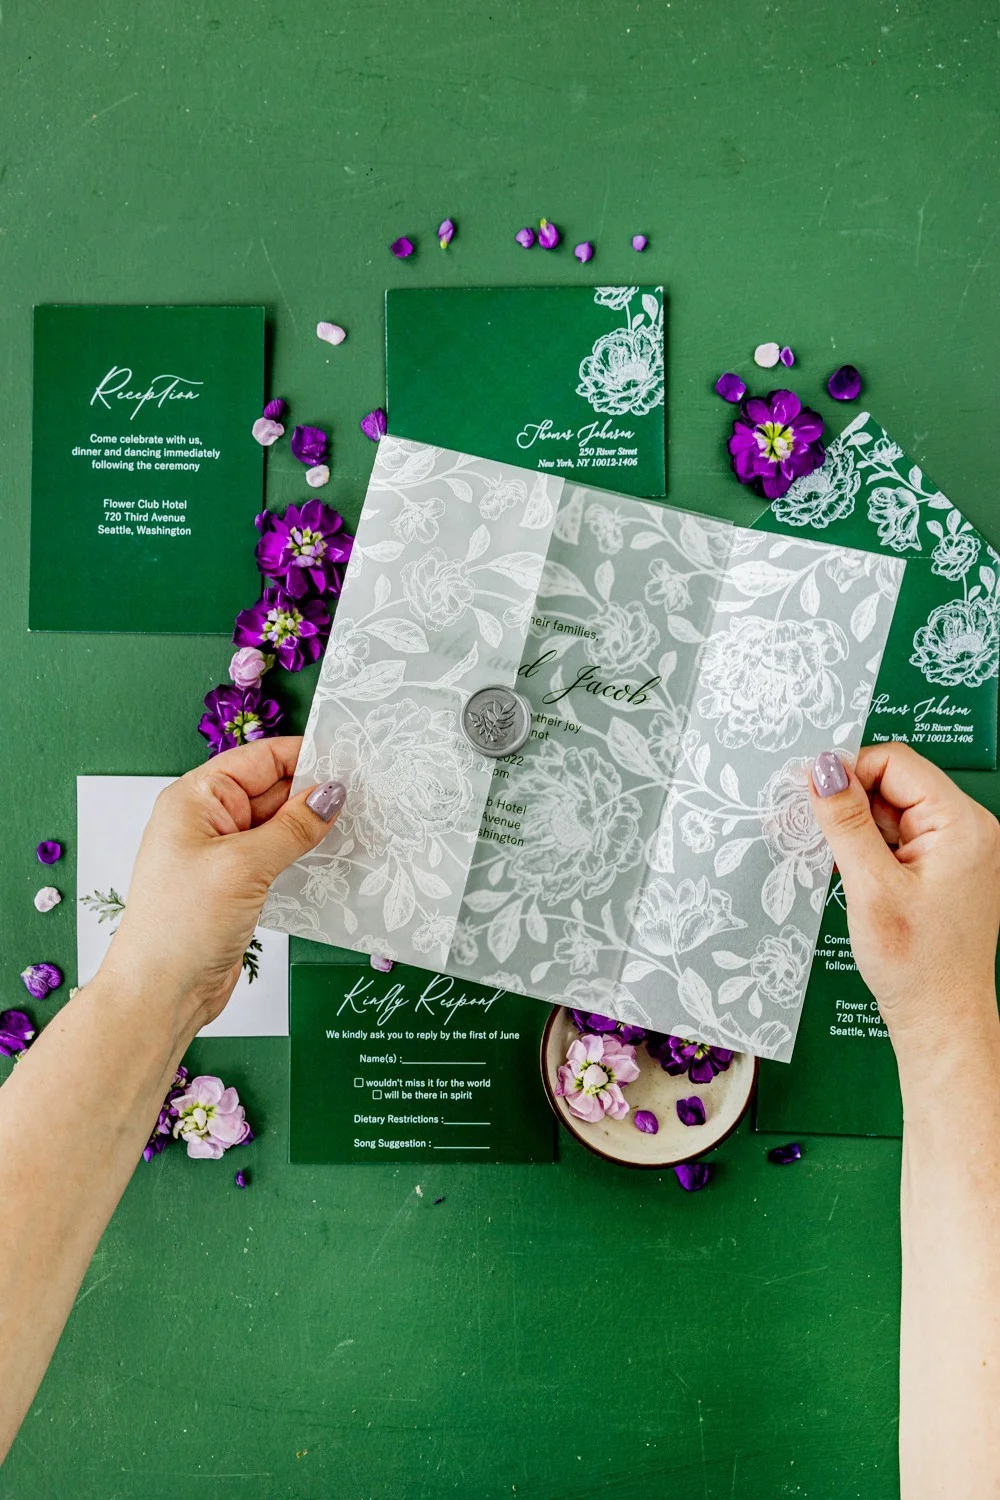 Elegant Enchanted Greenery Acrylic Wedding Invitations: Timeless and Transparent Invites for Your Special Day